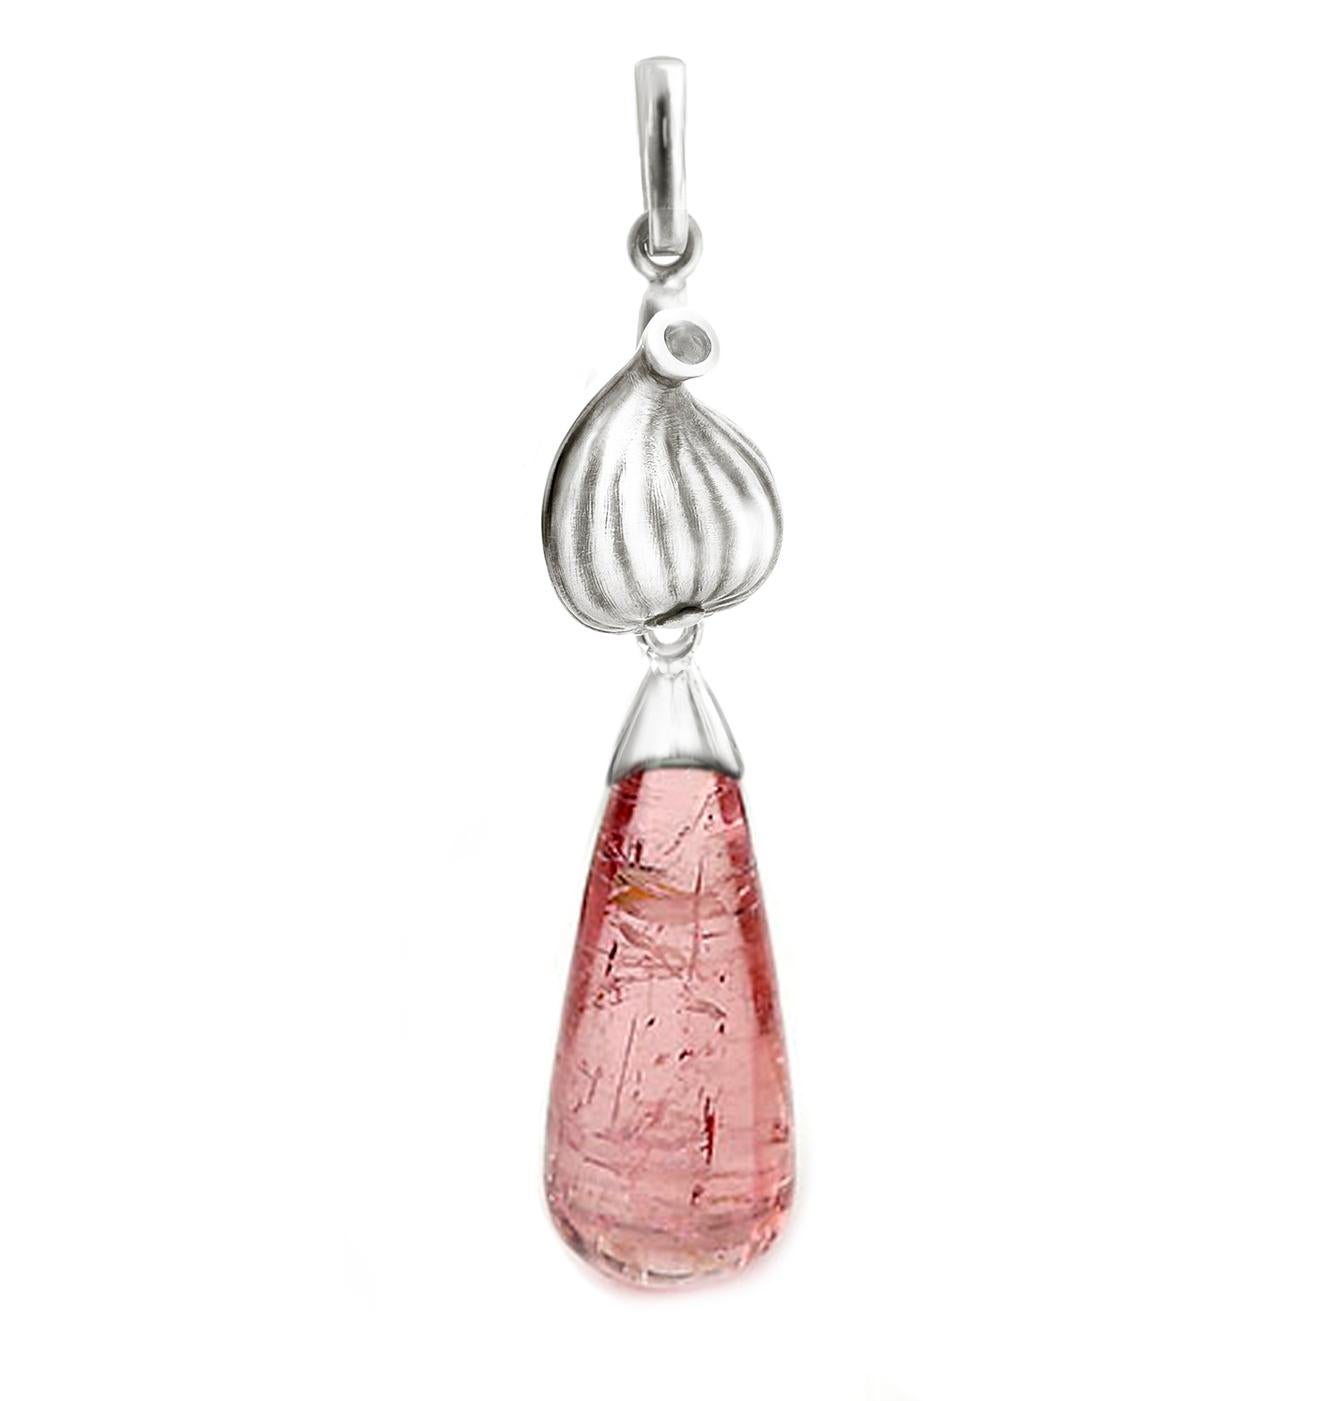 These contemporary drop earrings are made of 18 karat white gold with 20x8 mm (16 carats) natural rose tourmalines and round diamonds. The Fig collection was featured in Vogue UA review and they are designed by an artist and oil painter from